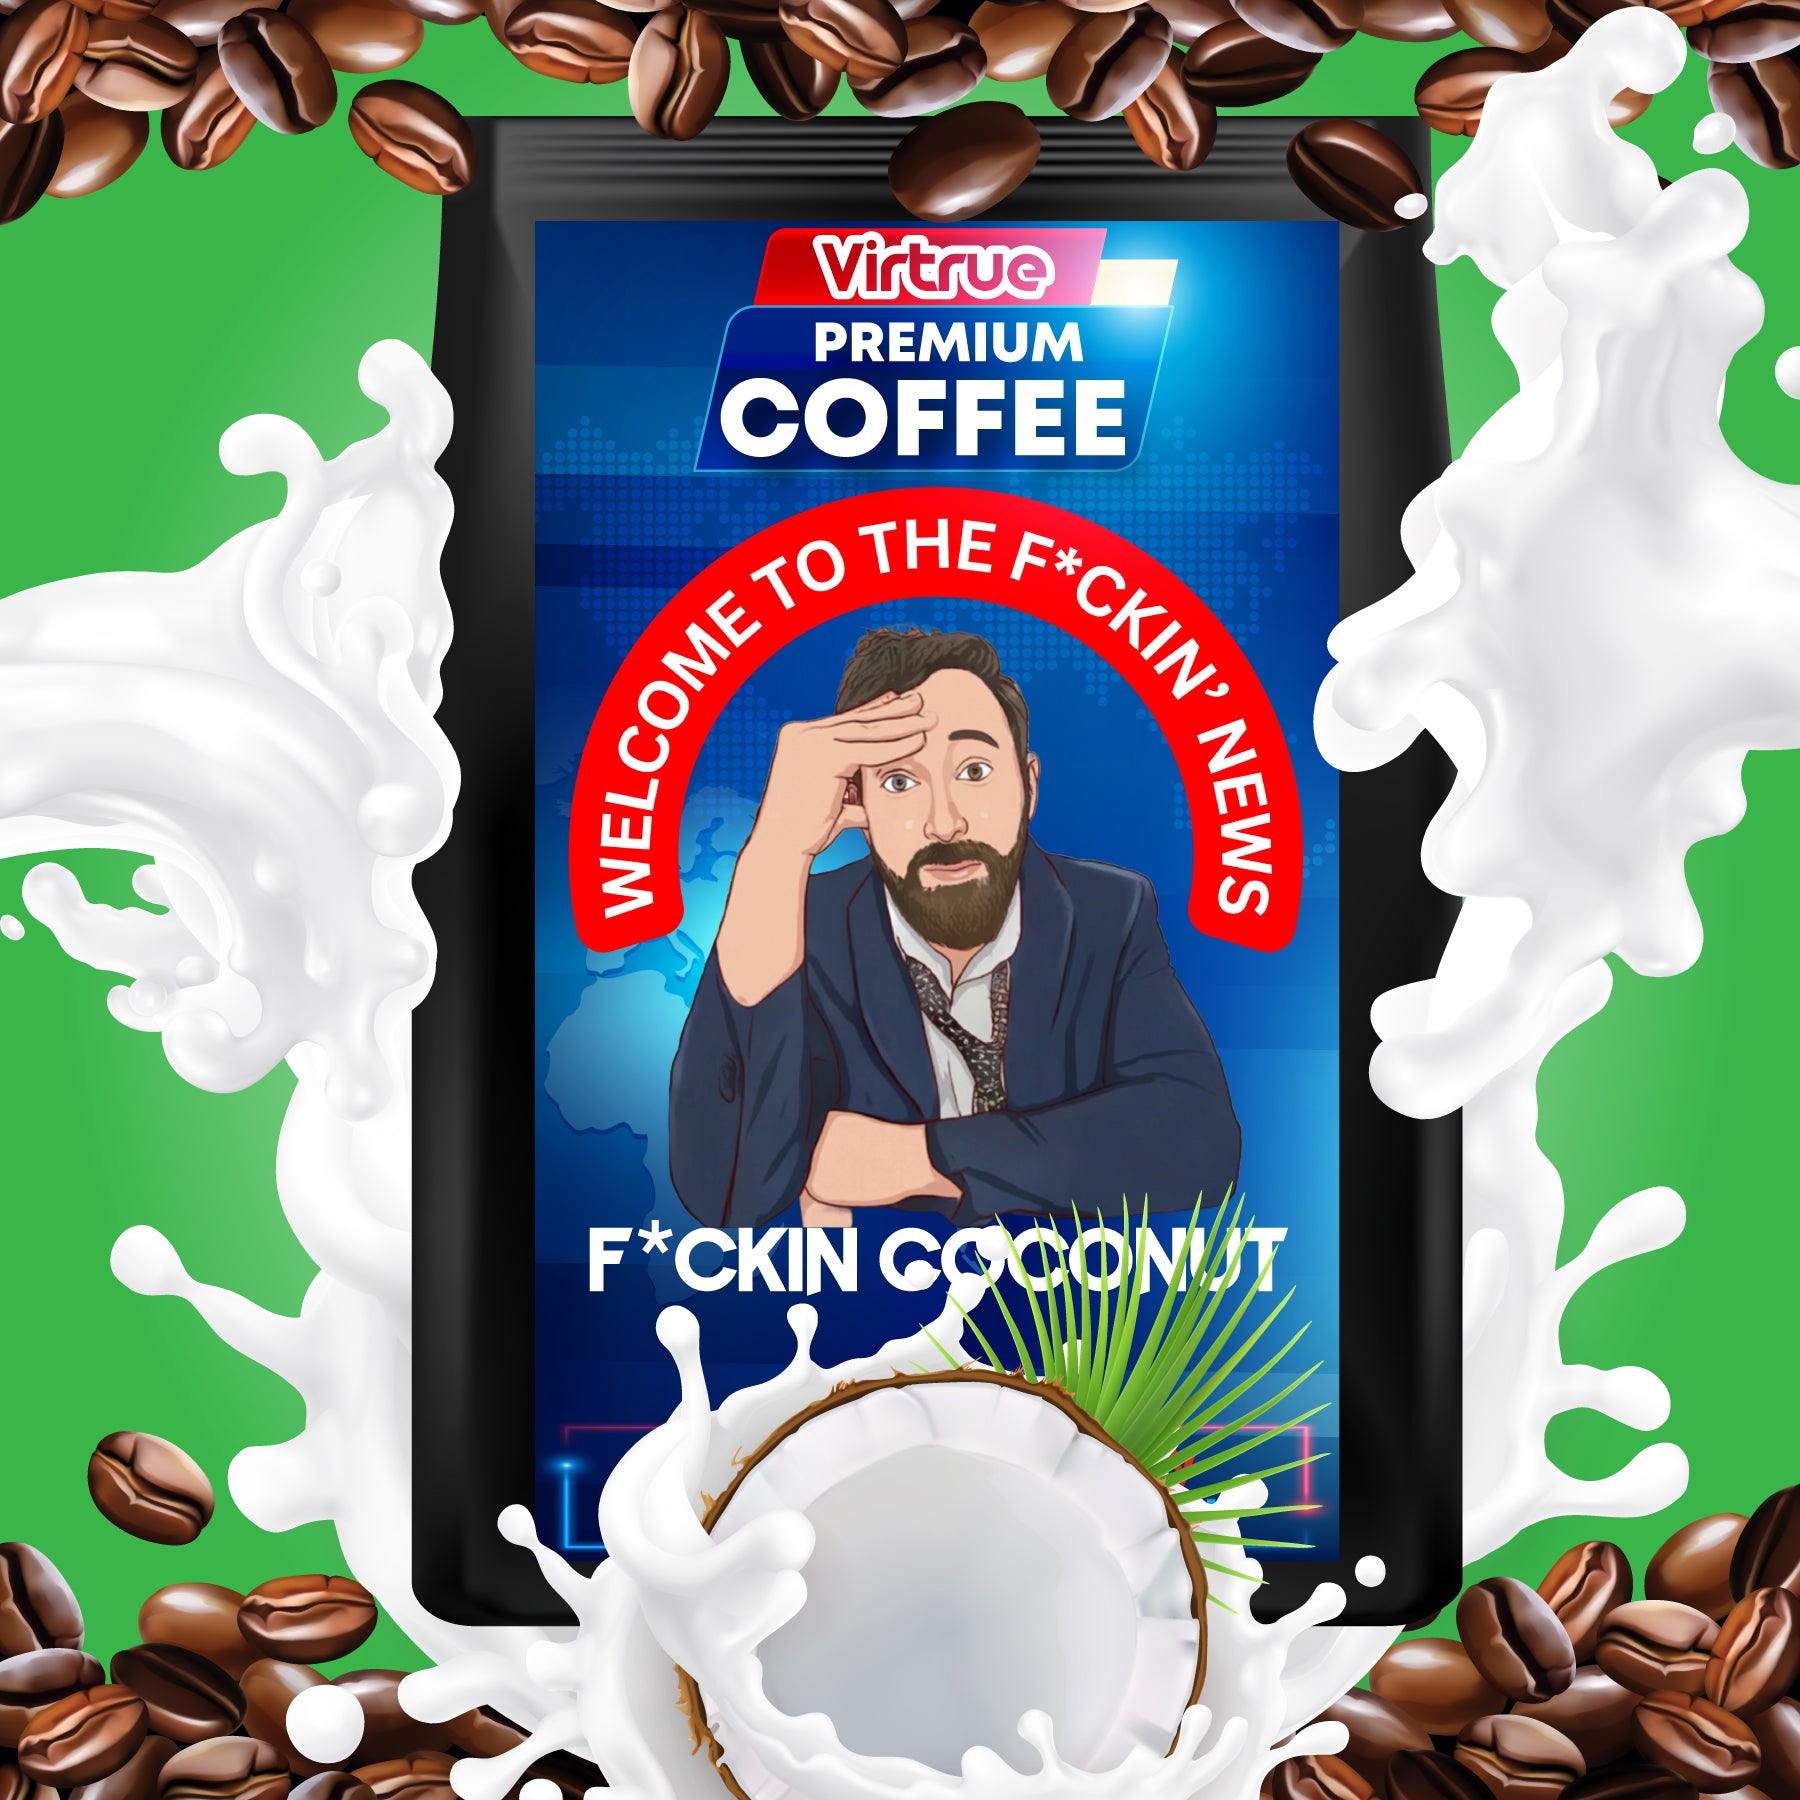 Kellerman Flavored Coffee 16oz - Inspired by The F*ckin' News